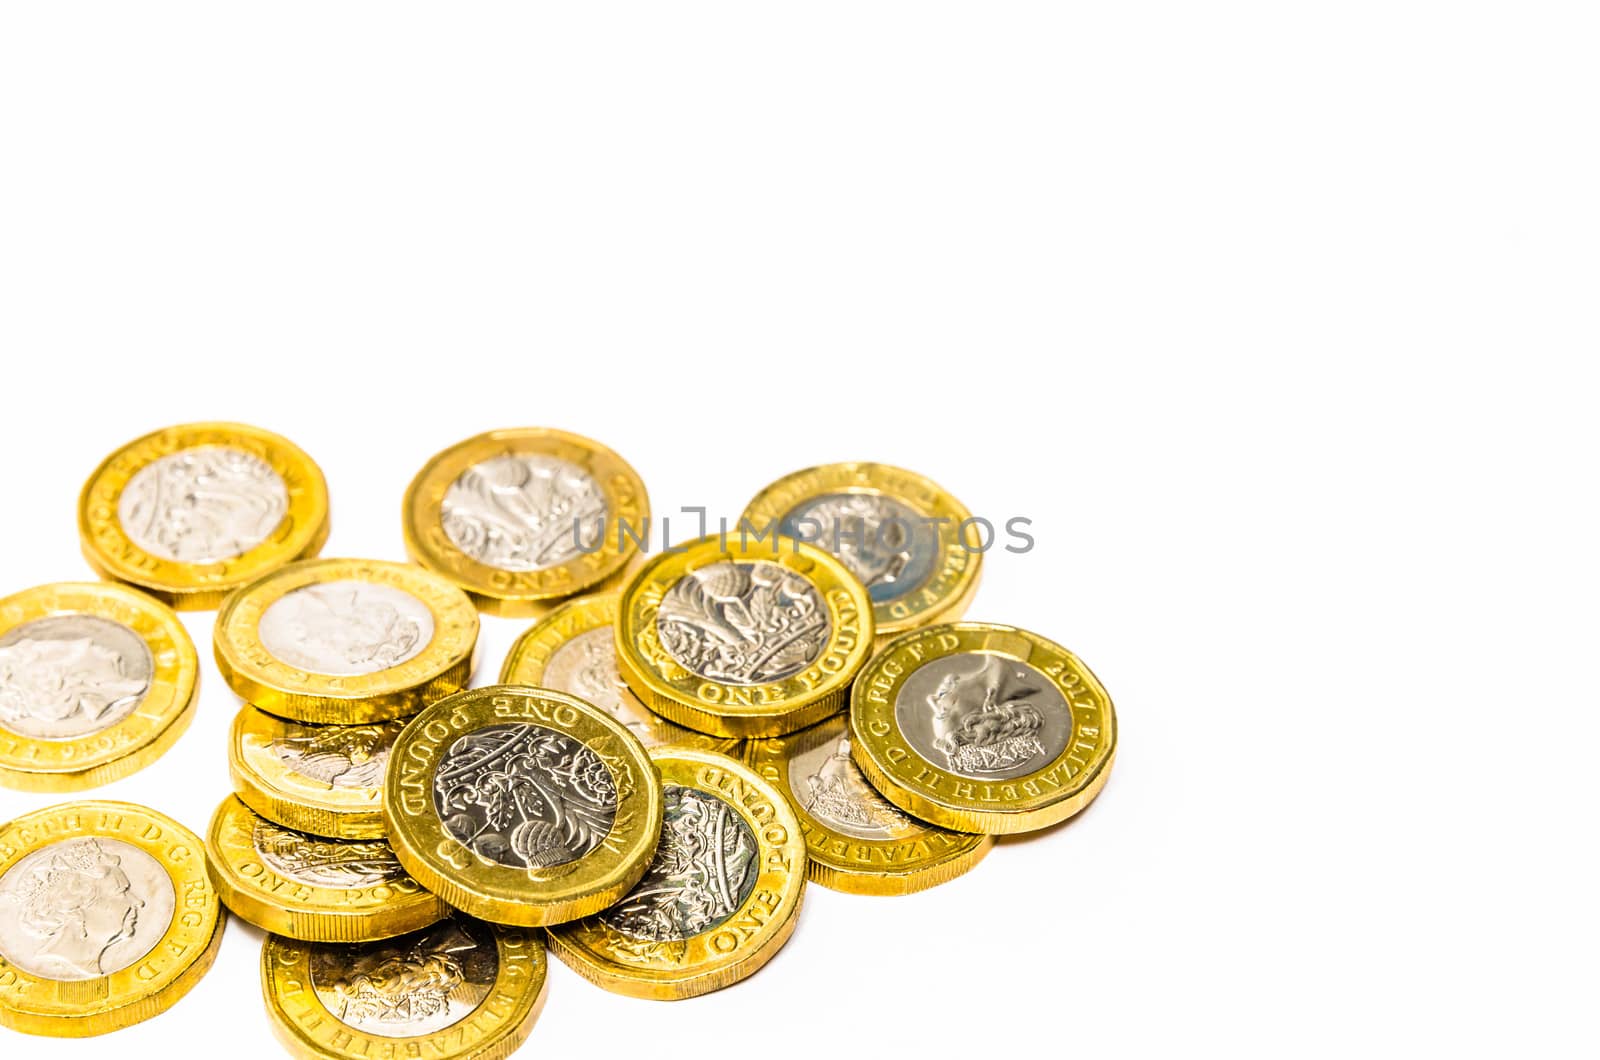 New one pound coins on a white background by mauricallari